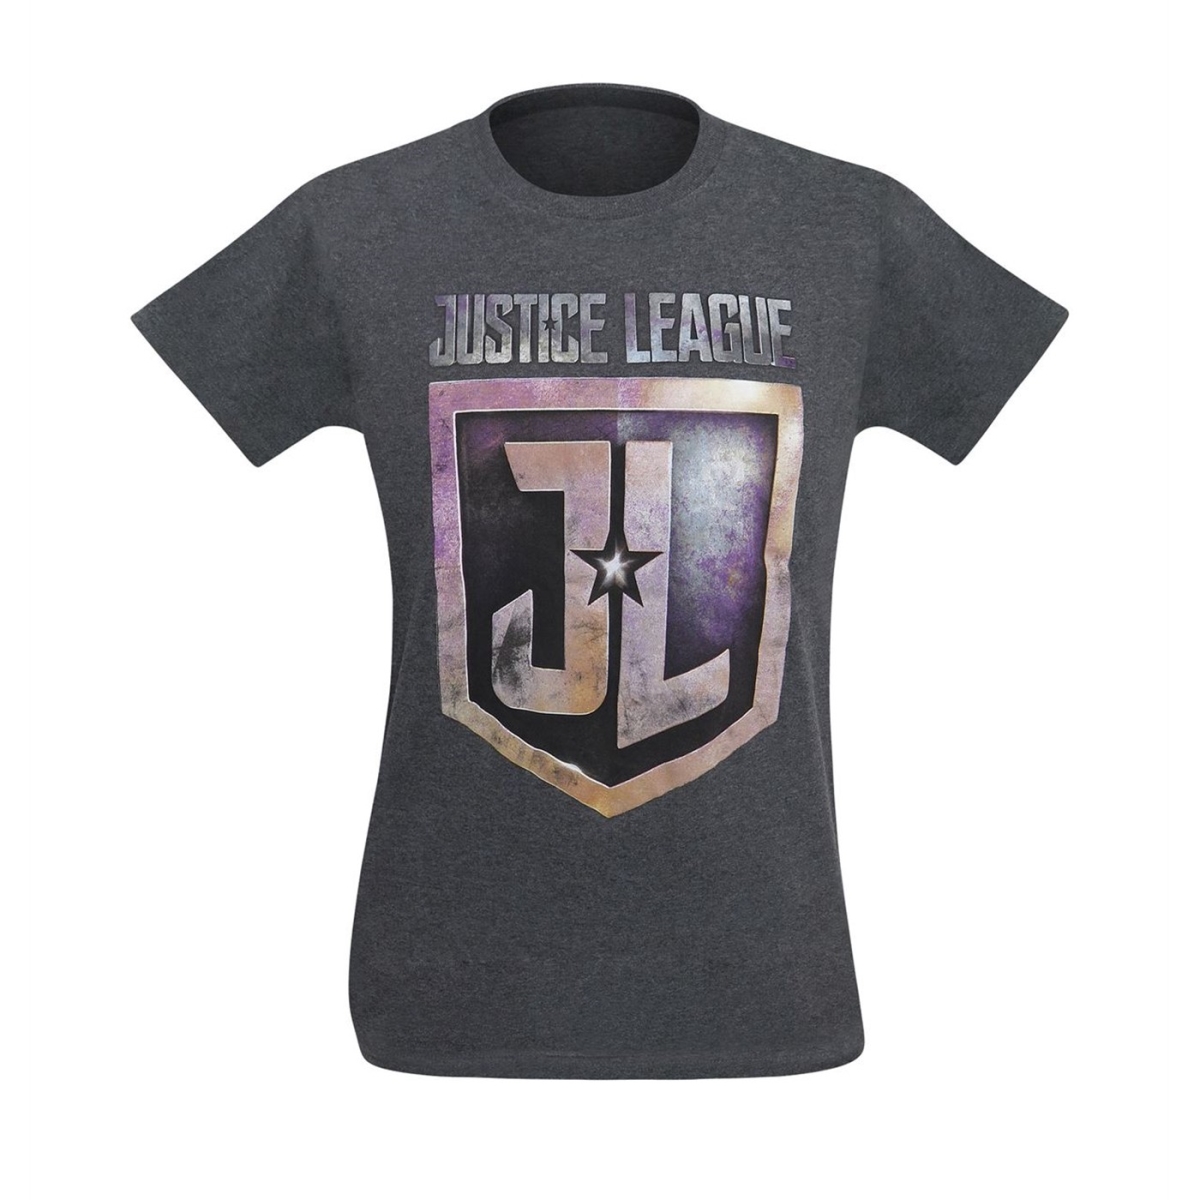 Picture of Justice League tsjlmovbadgekidss Justice League Movie Badge Youth T-Shirt - Youth Small 7-8